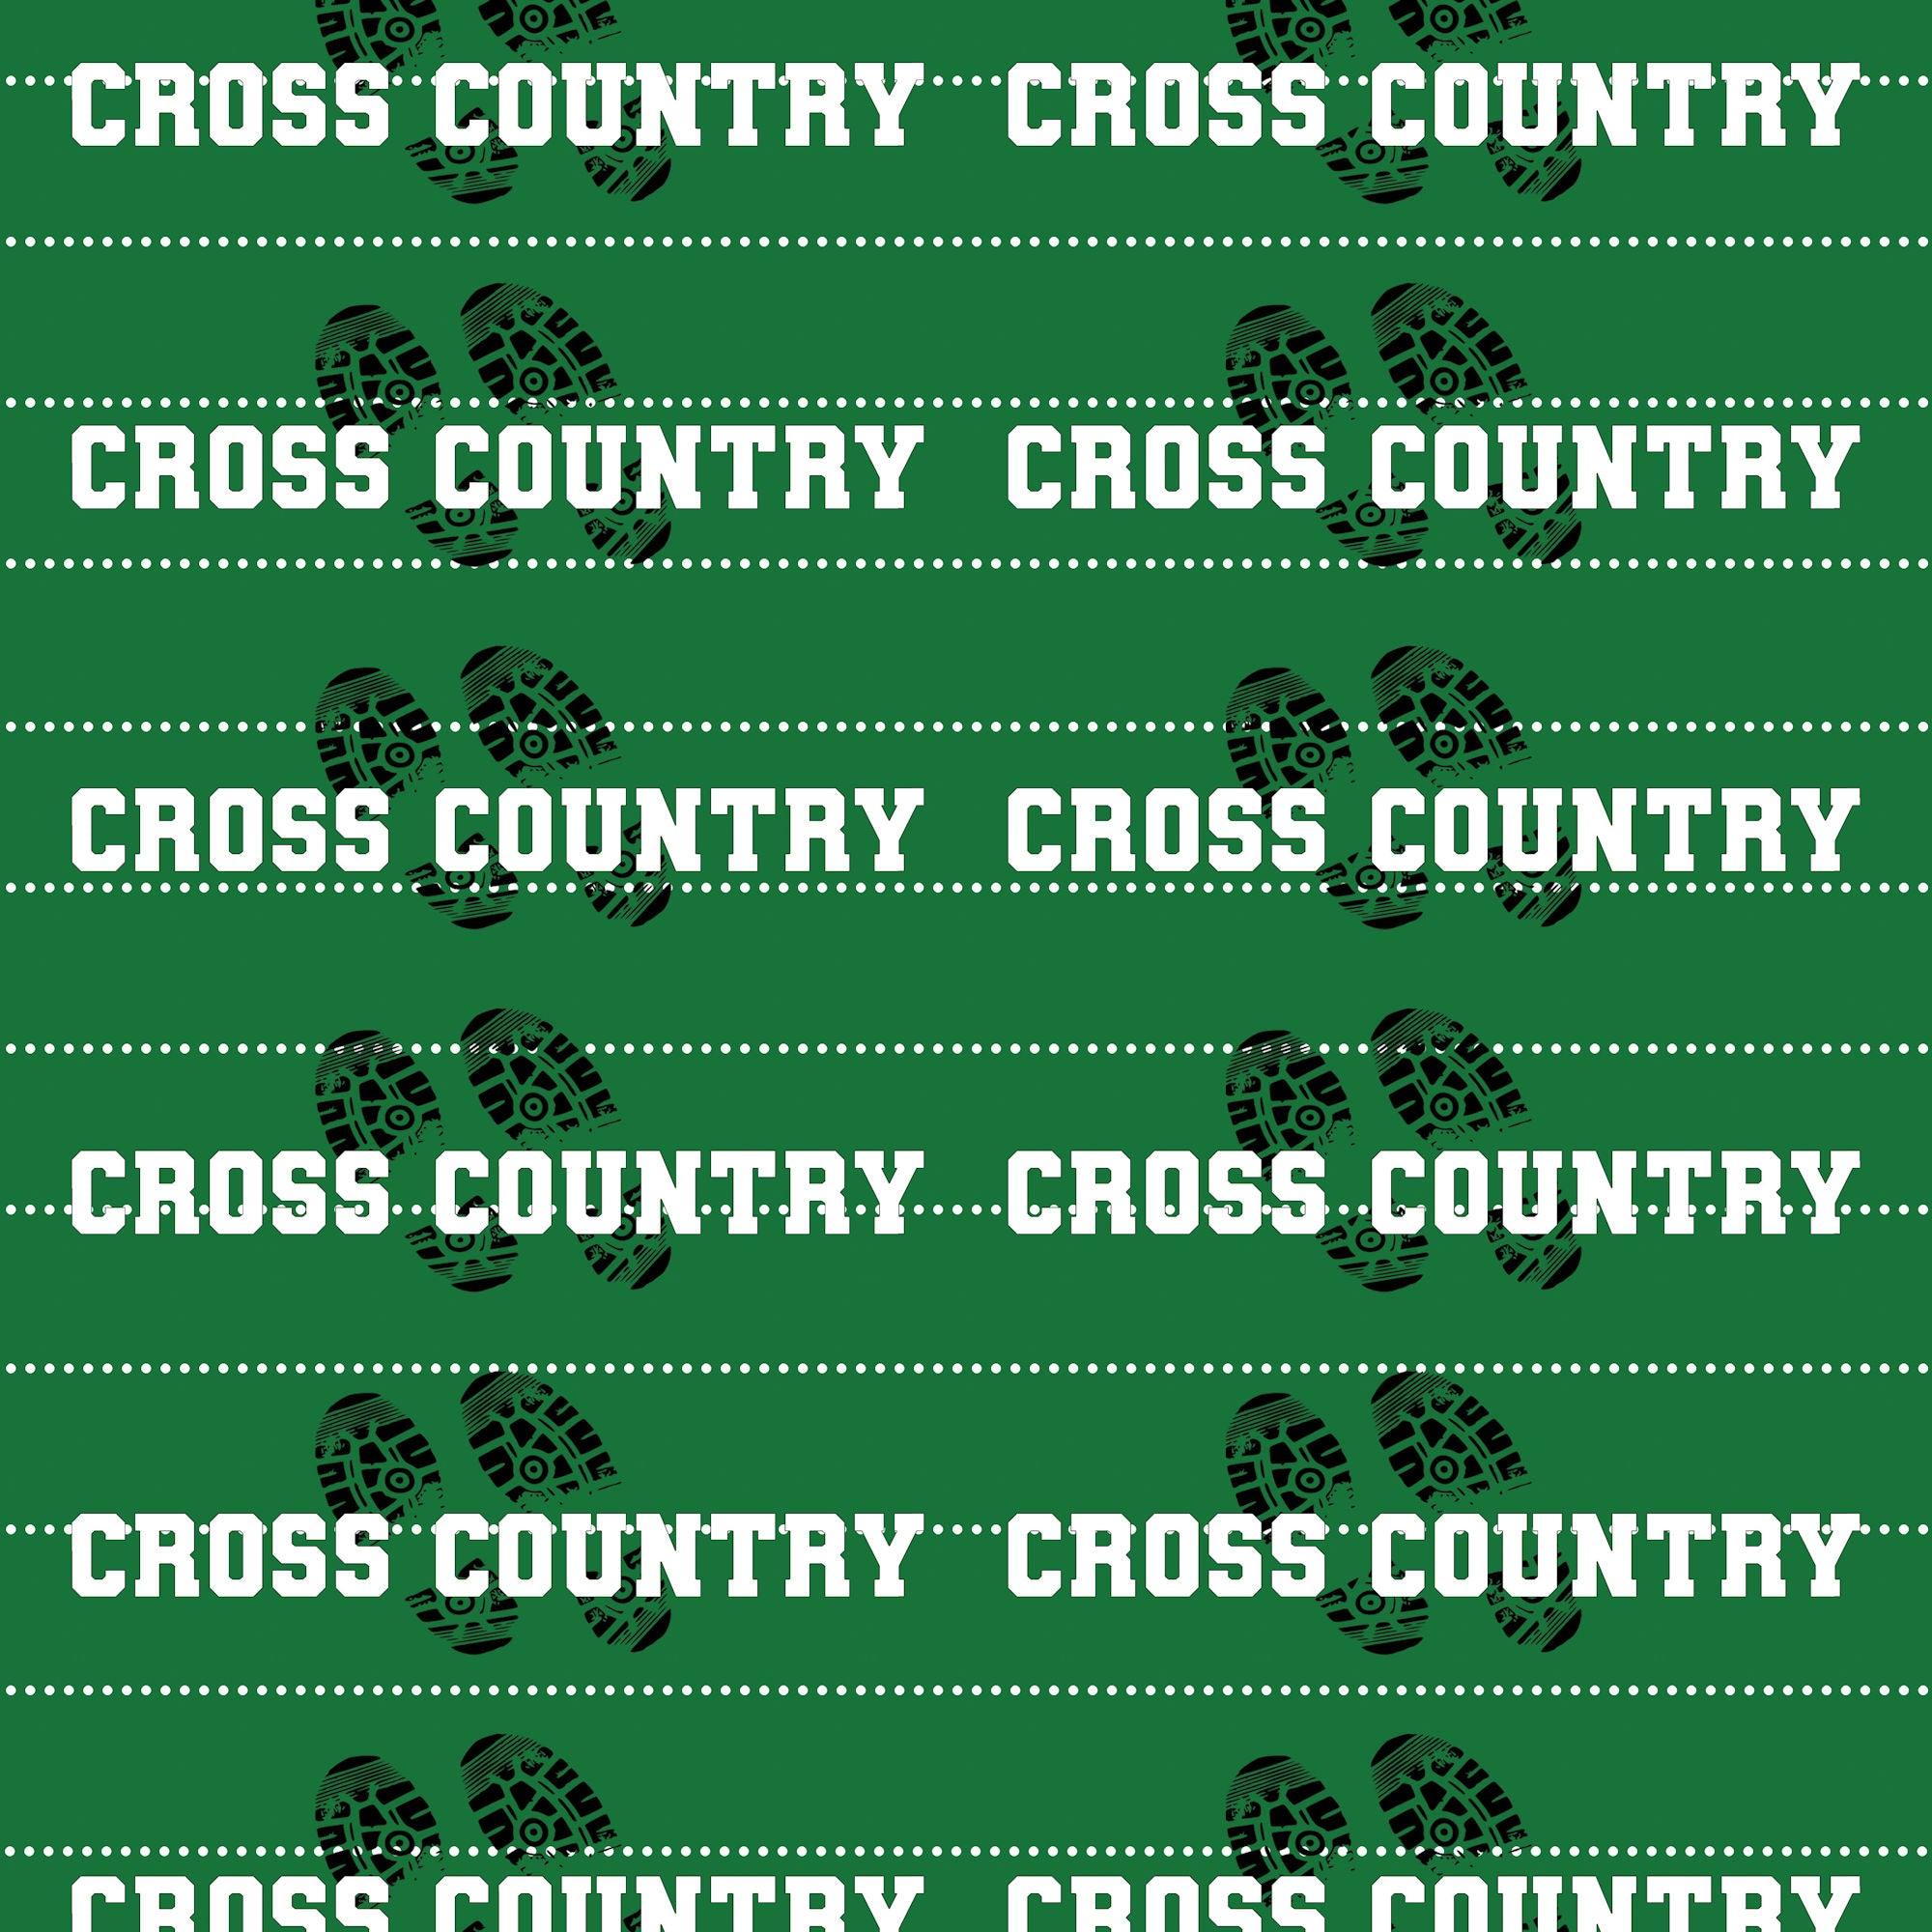 Cross Country Collection Words 12 x 12 Double-Sided Scrapbook Paper by SSC Designs - Scrapbook Supply Companies